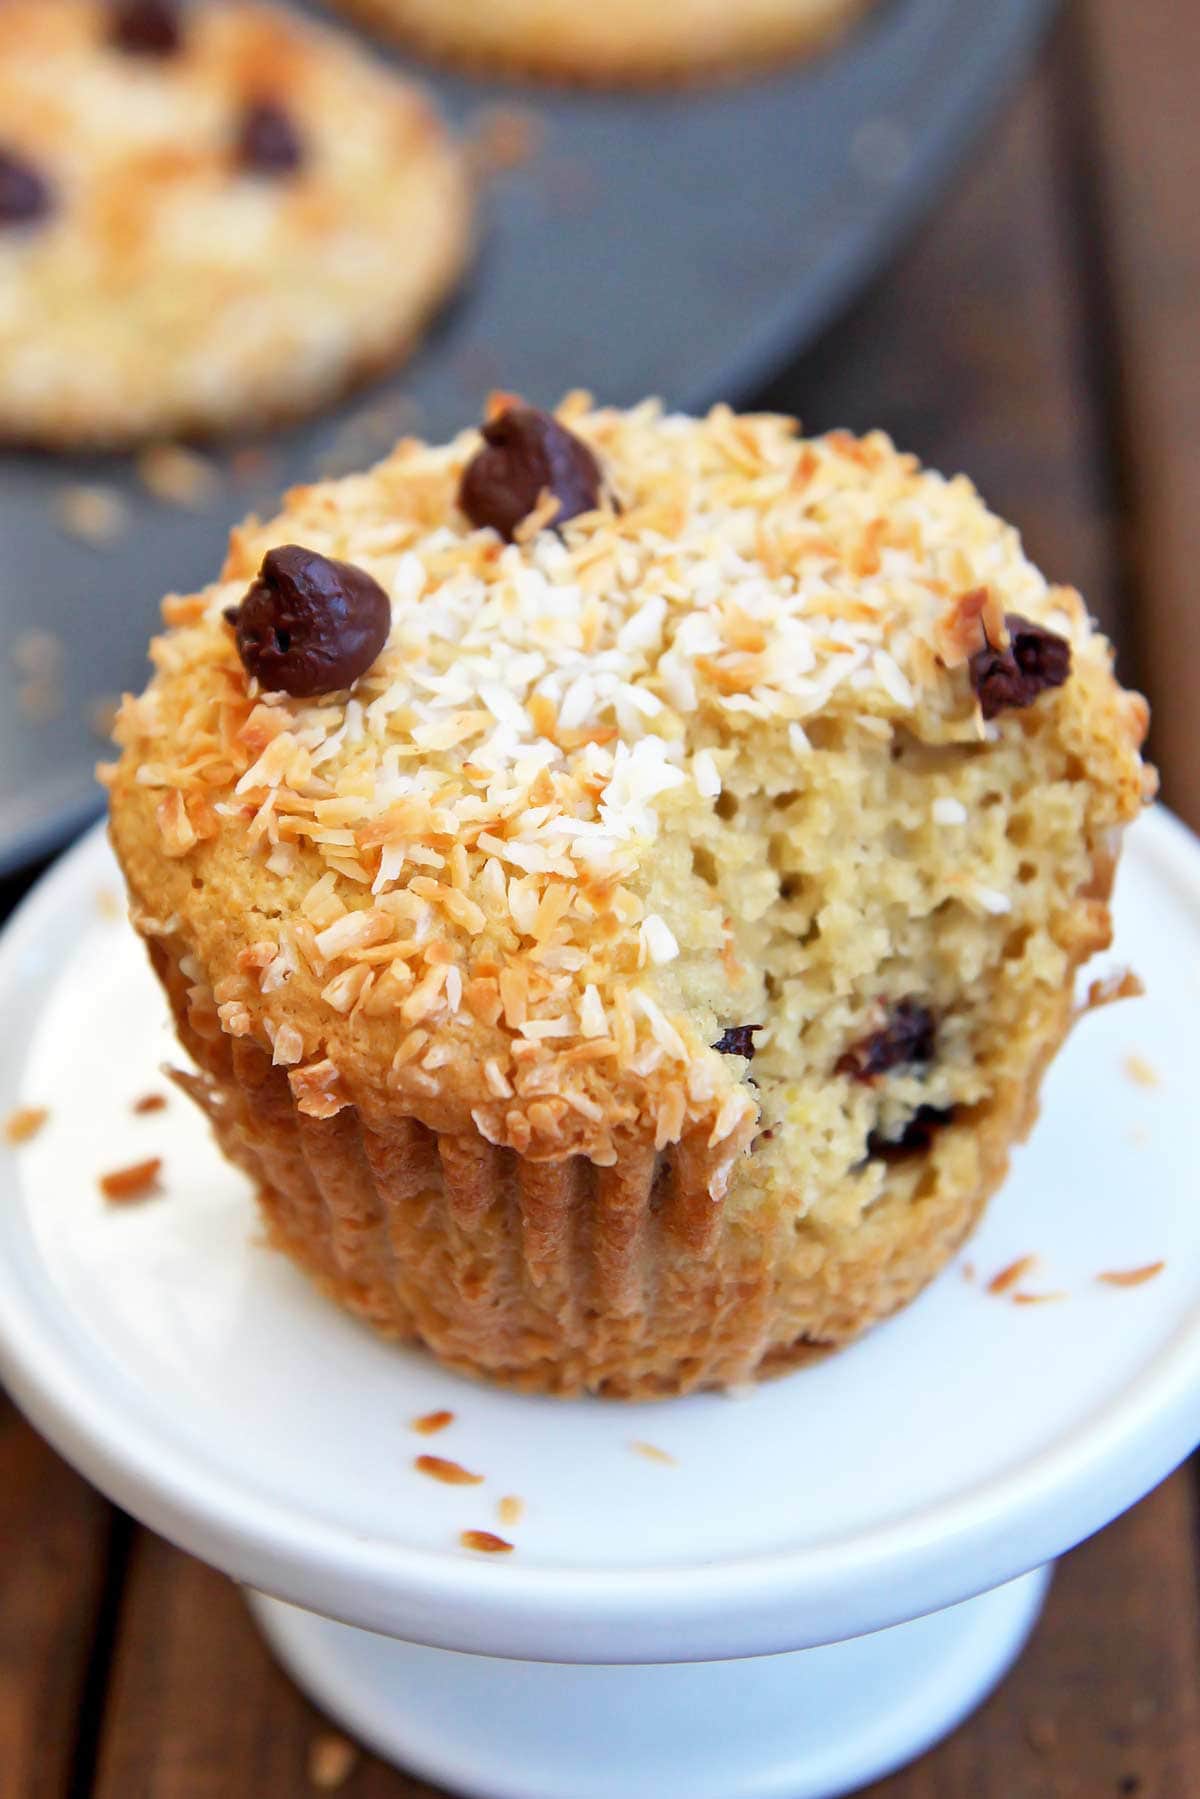 Coconut flour almond butter muffin with chocolate chips and bite taken out to reveal inside texture